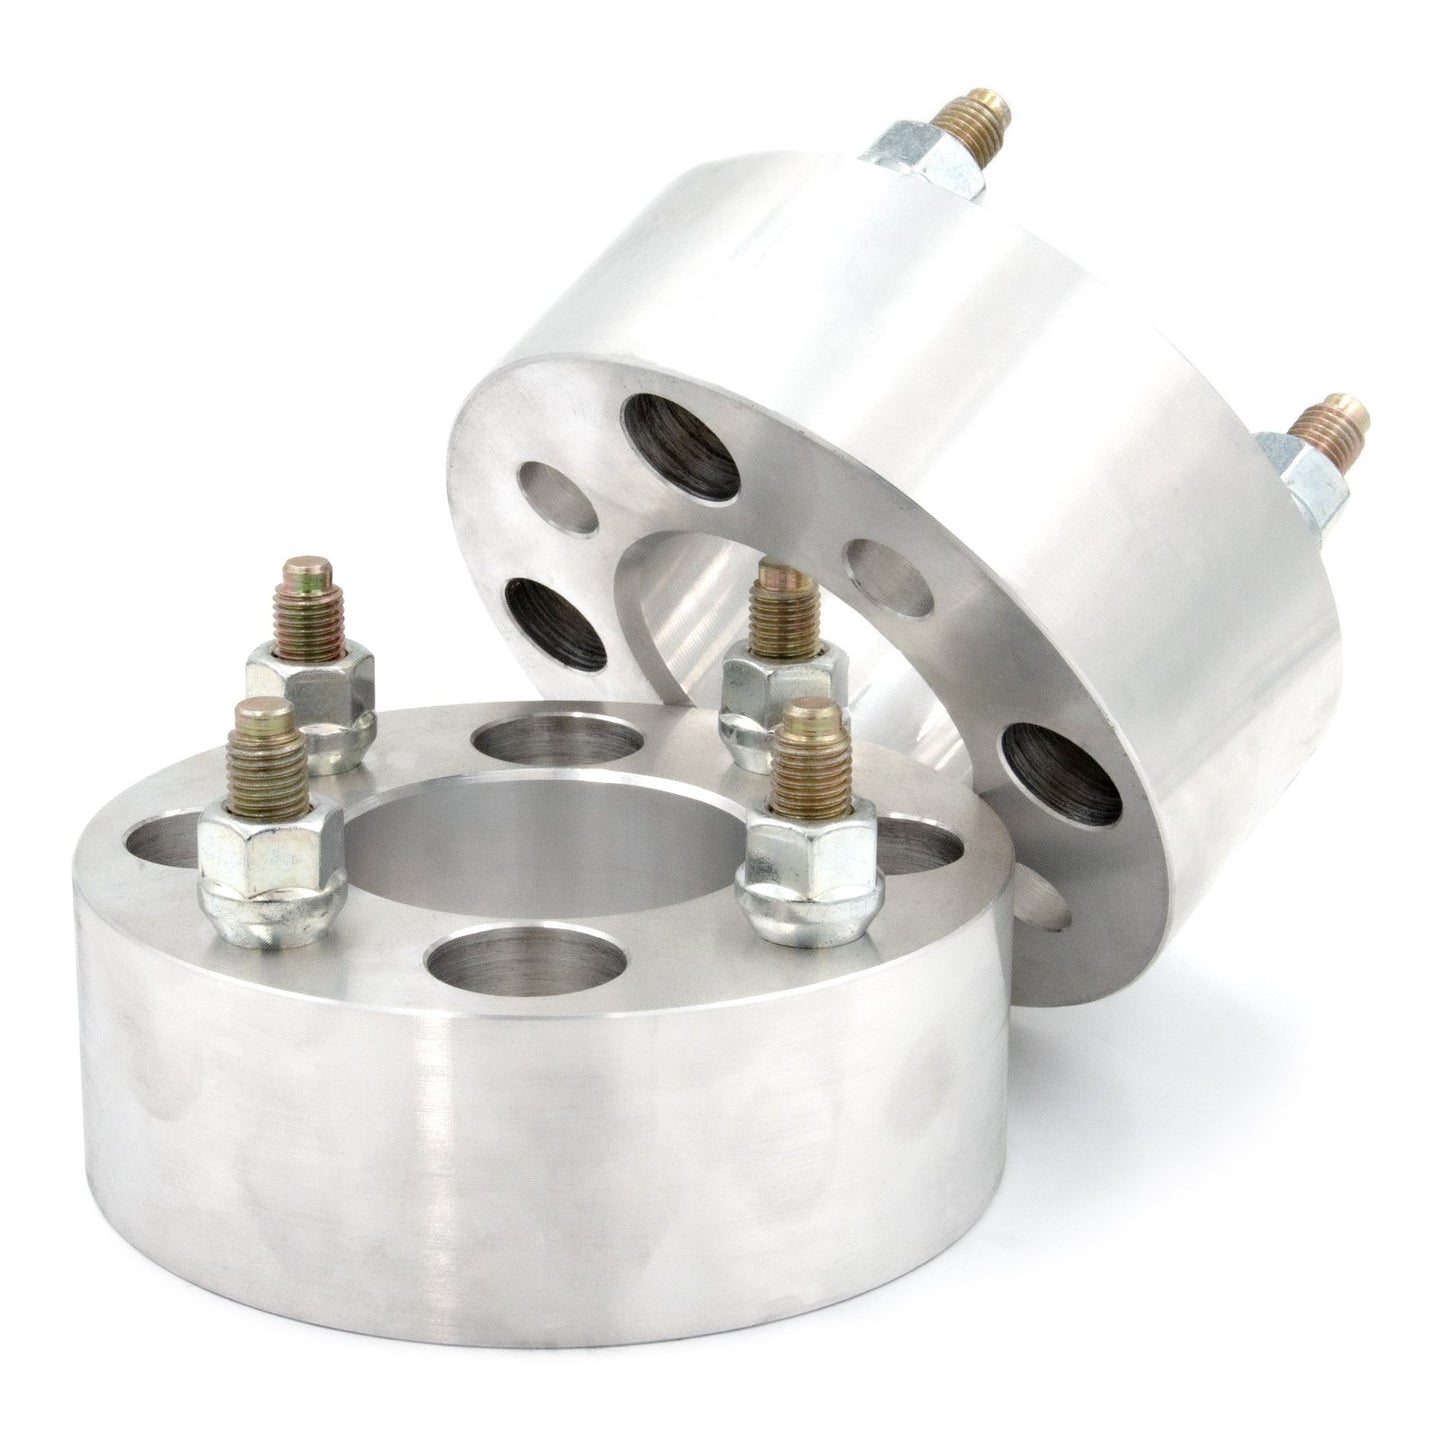 4x115 to 4x100 Wheel Spacer/Adapter - Thickness: 3/4"- 4"